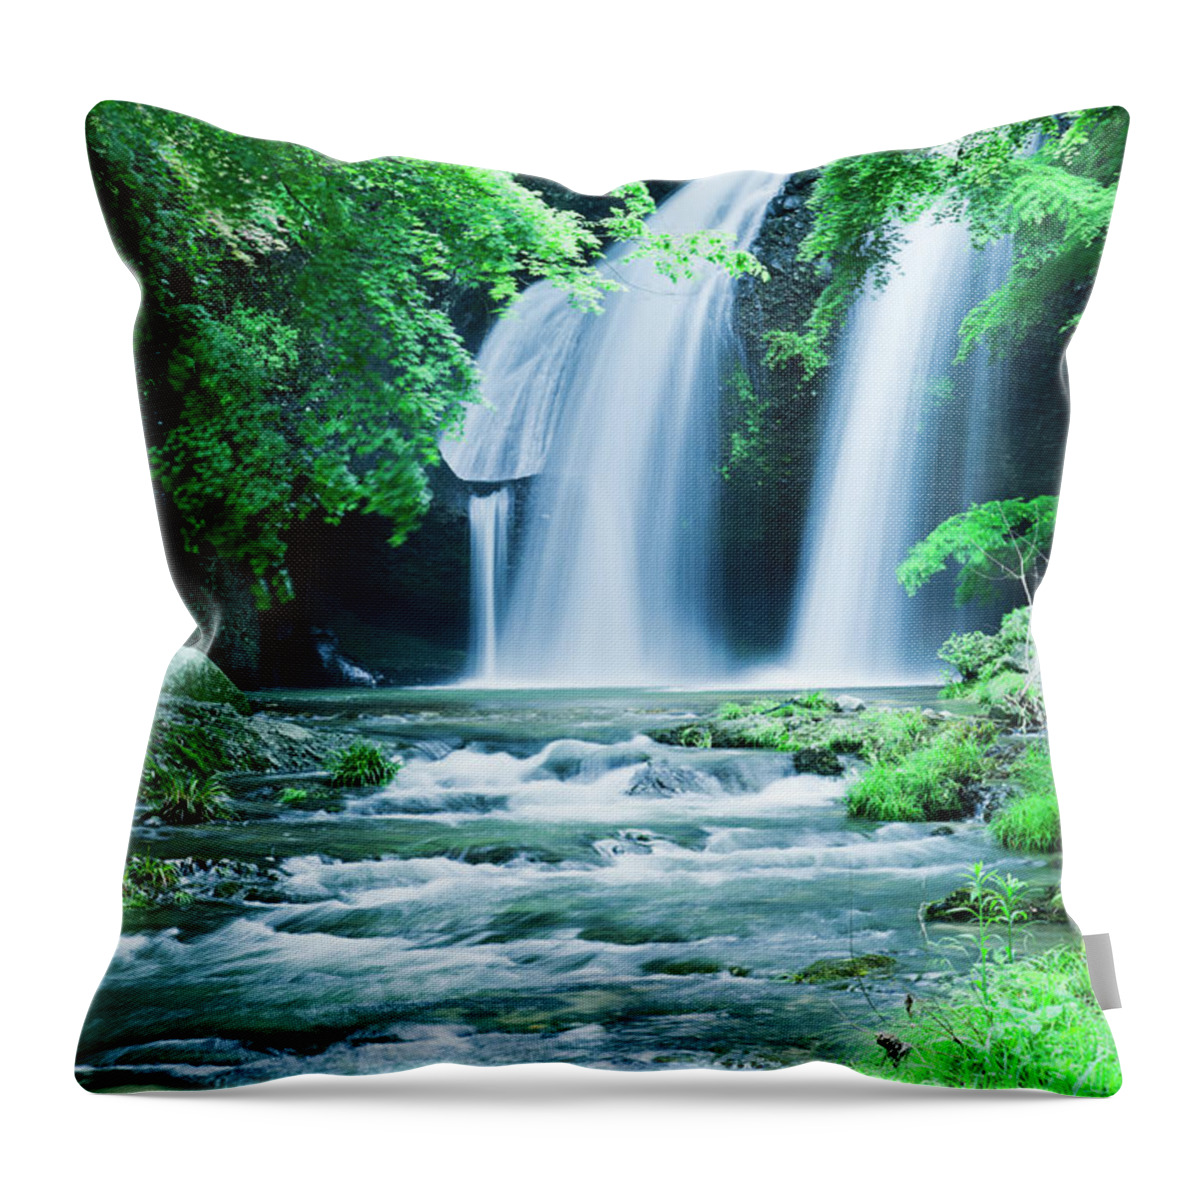 Scenics Throw Pillow featuring the photograph Waterfalls #1 by Ooyoo